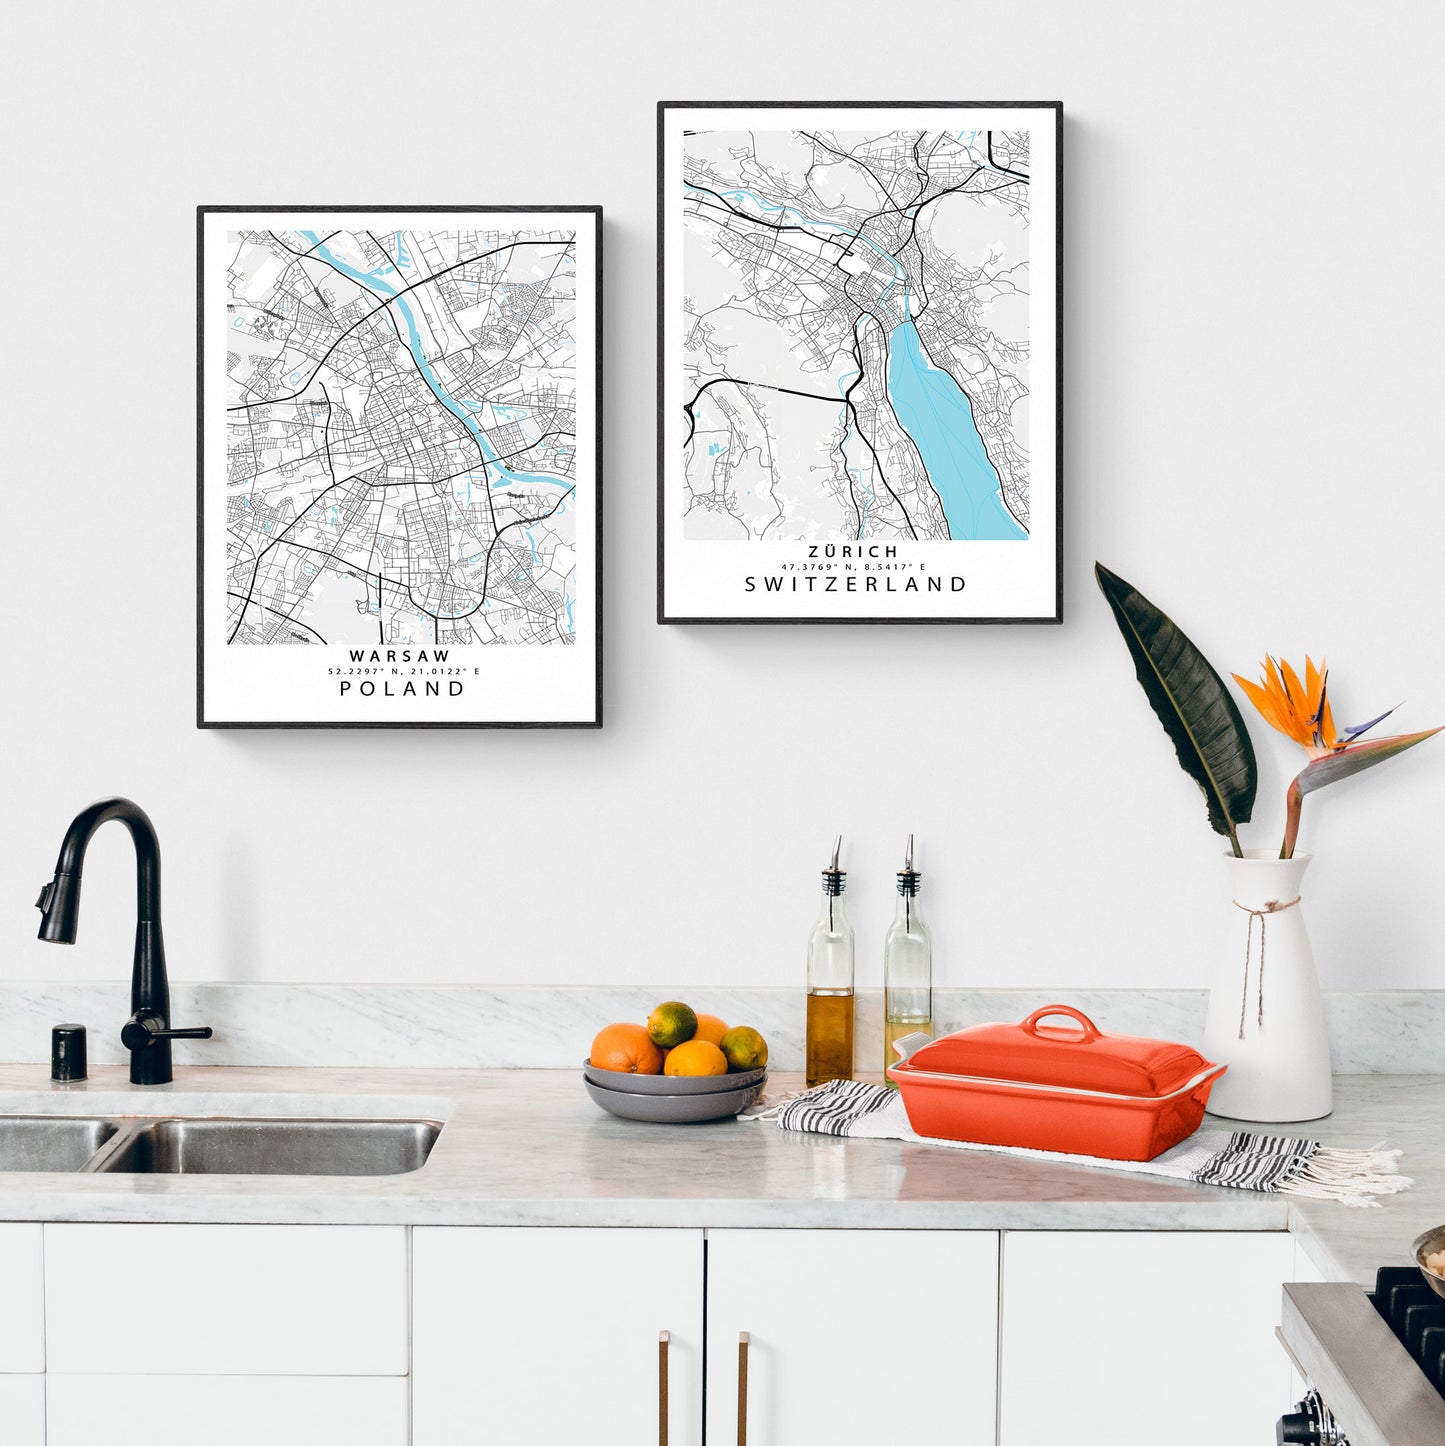 Discover the beauty of the world with our stunning Warsaw Street Map Posters - custom prints of city maps with a Scandinavian flair. Transform your walls with this poster collection, featuring city maps from around the world. Whether you're a local looking to add some hometown pride or a traveler dreaming of your next getaway, our posters are the perfect way to add a touch of wanderlust to your home decor. So what's your favorite city? Time to start decorating!